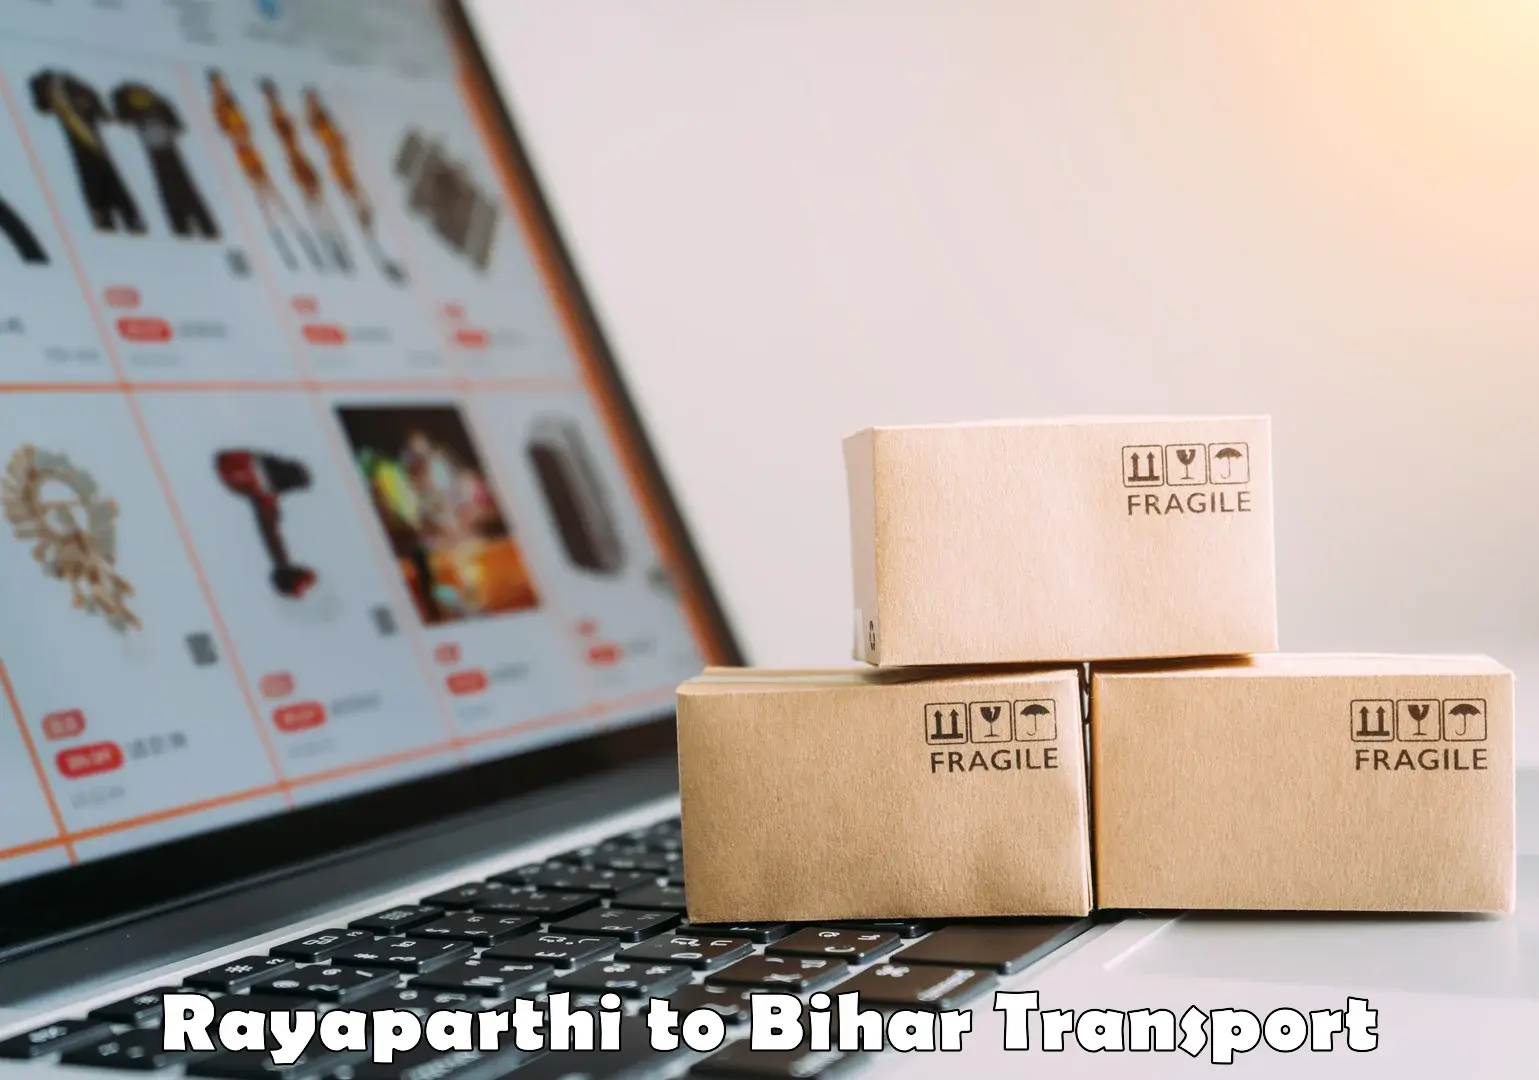 Package delivery services Rayaparthi to Sheikhpura